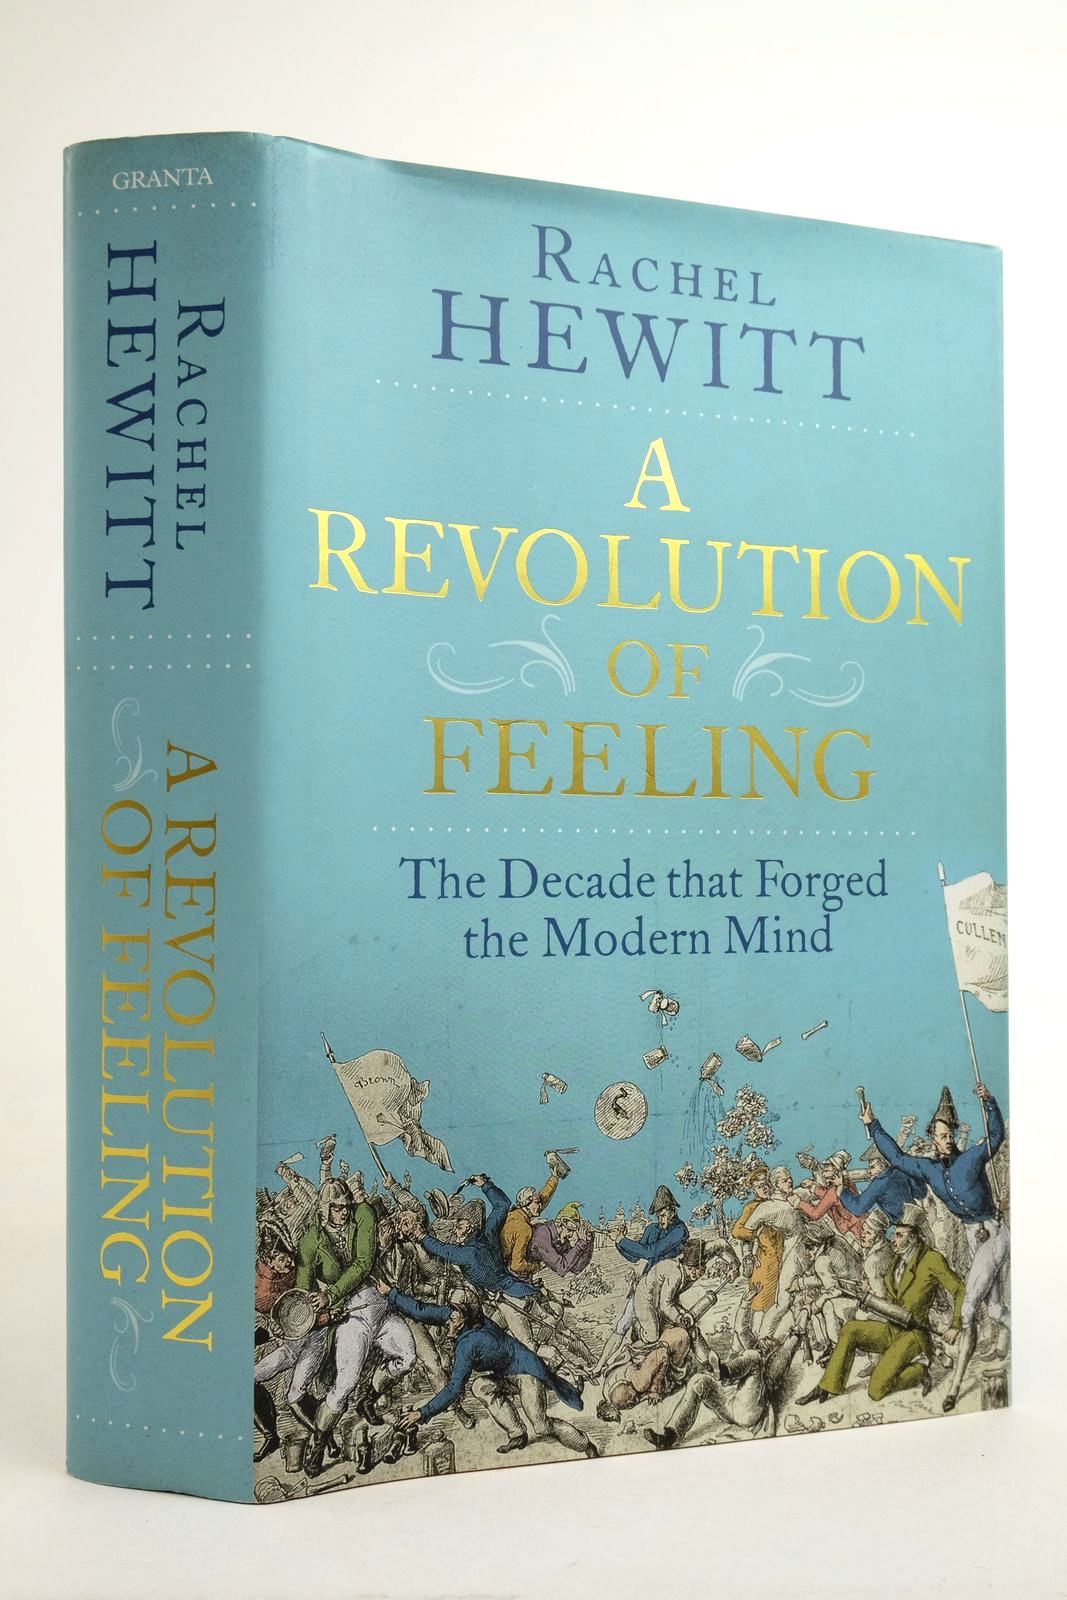 Photo of A REVOLUTION OF FEELING: THE DECADE THAT FORGED THE MODERN MIND written by Hewitt, Rachel published by Granta Books (STOCK CODE: 2135659)  for sale by Stella & Rose's Books